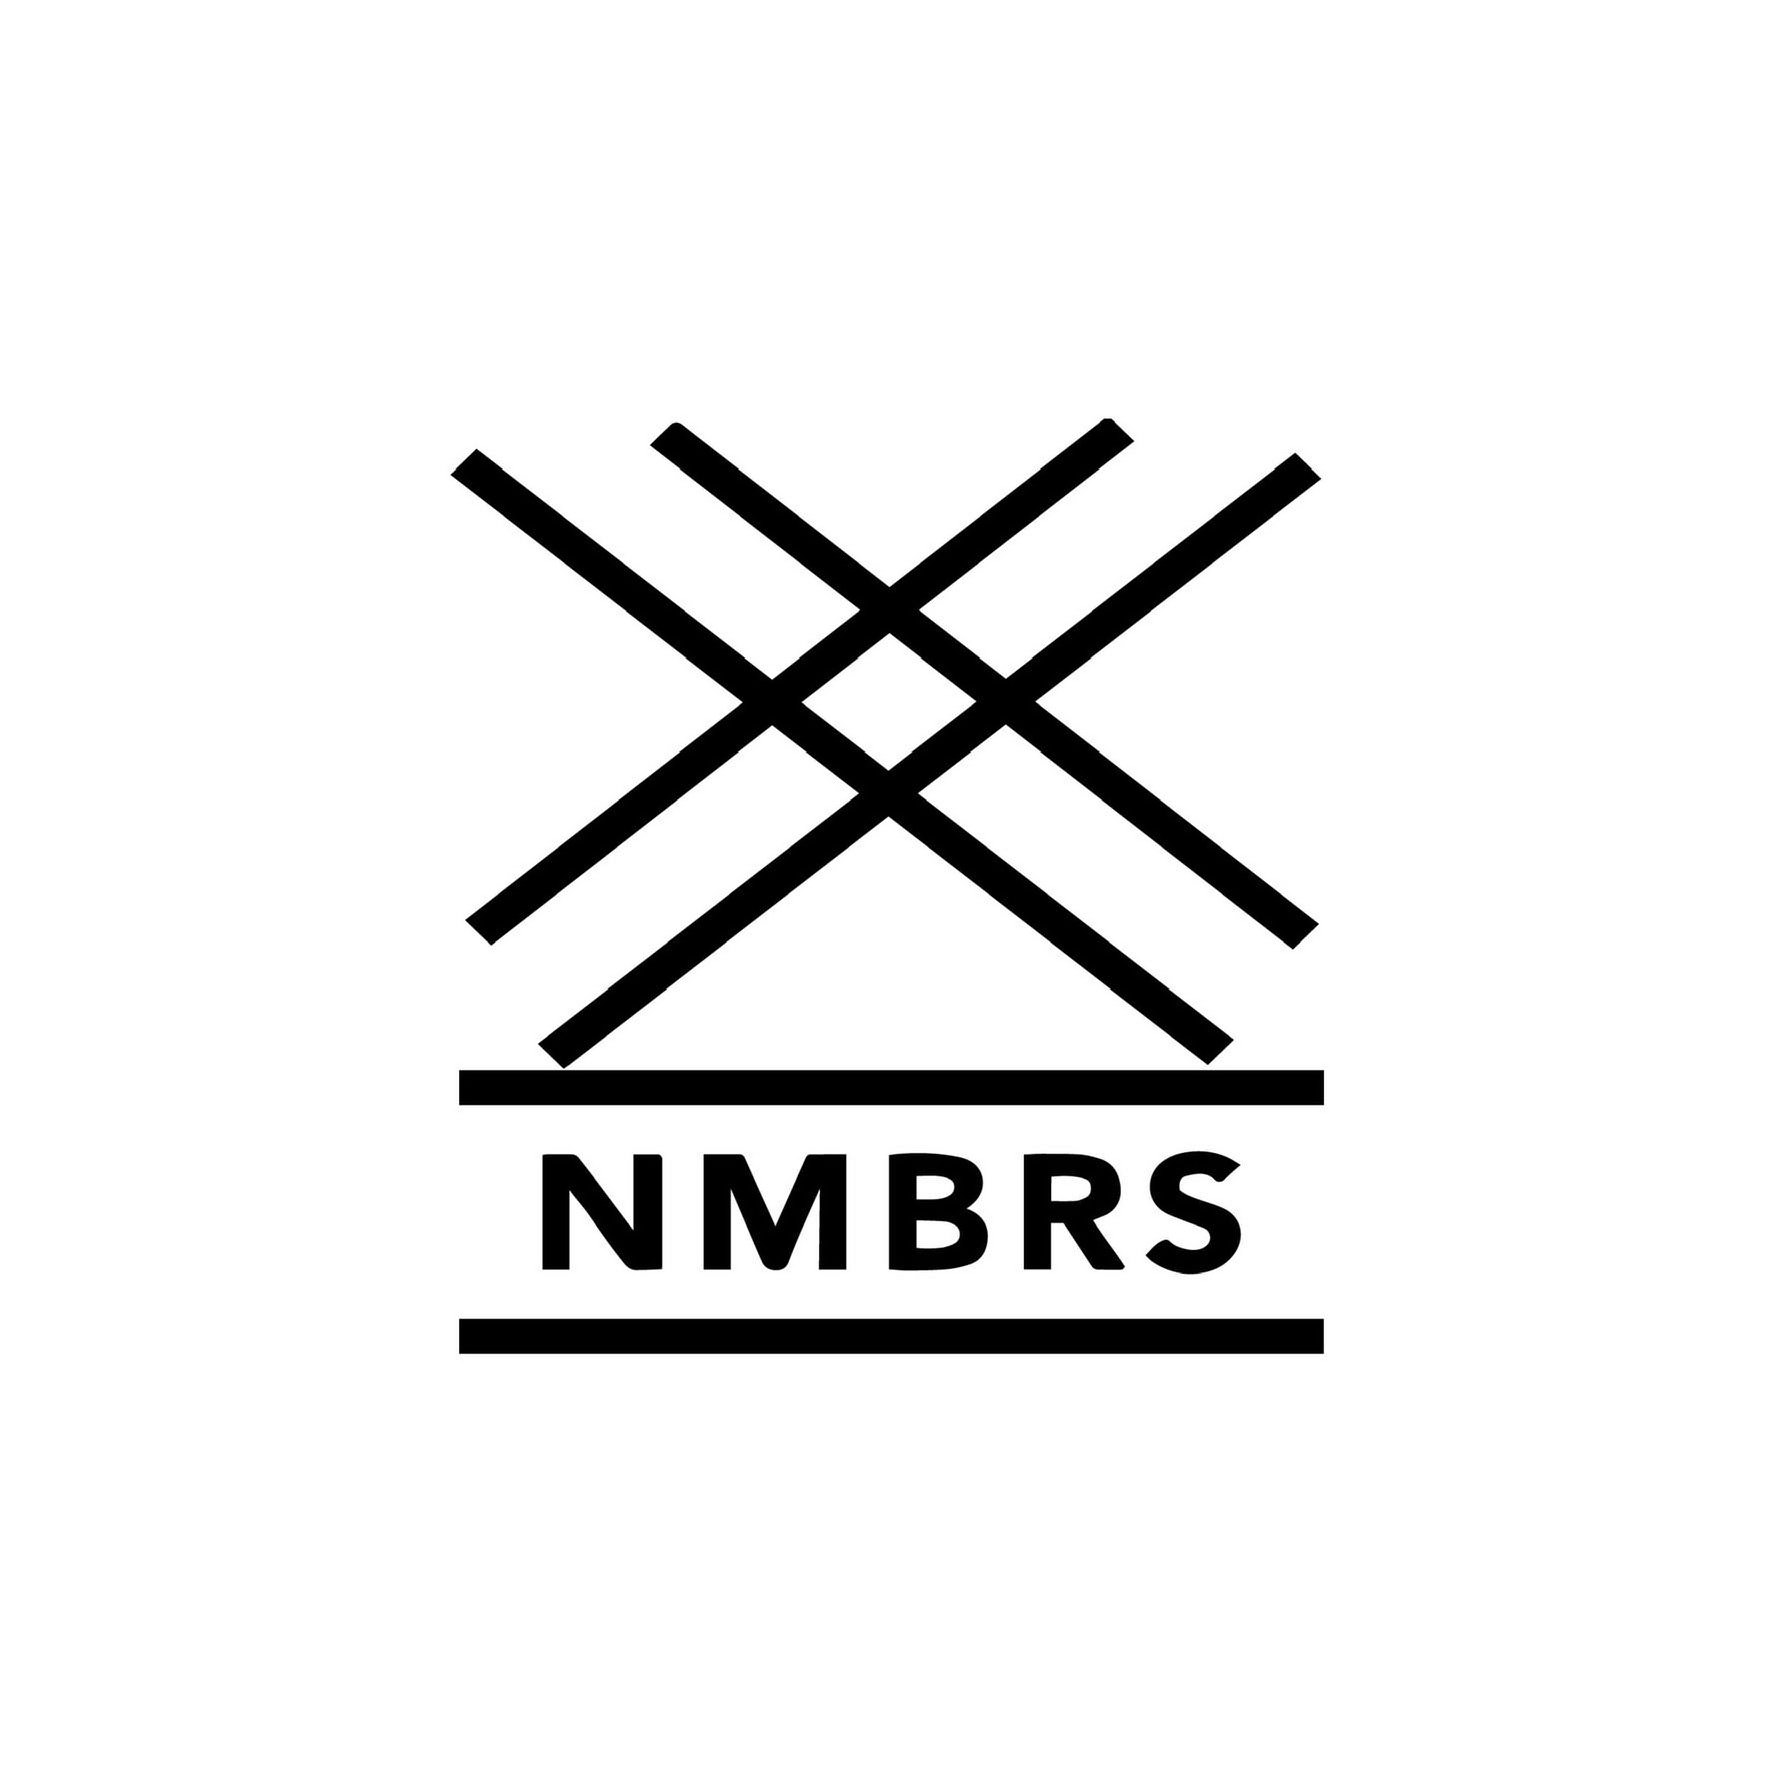 NMBRS